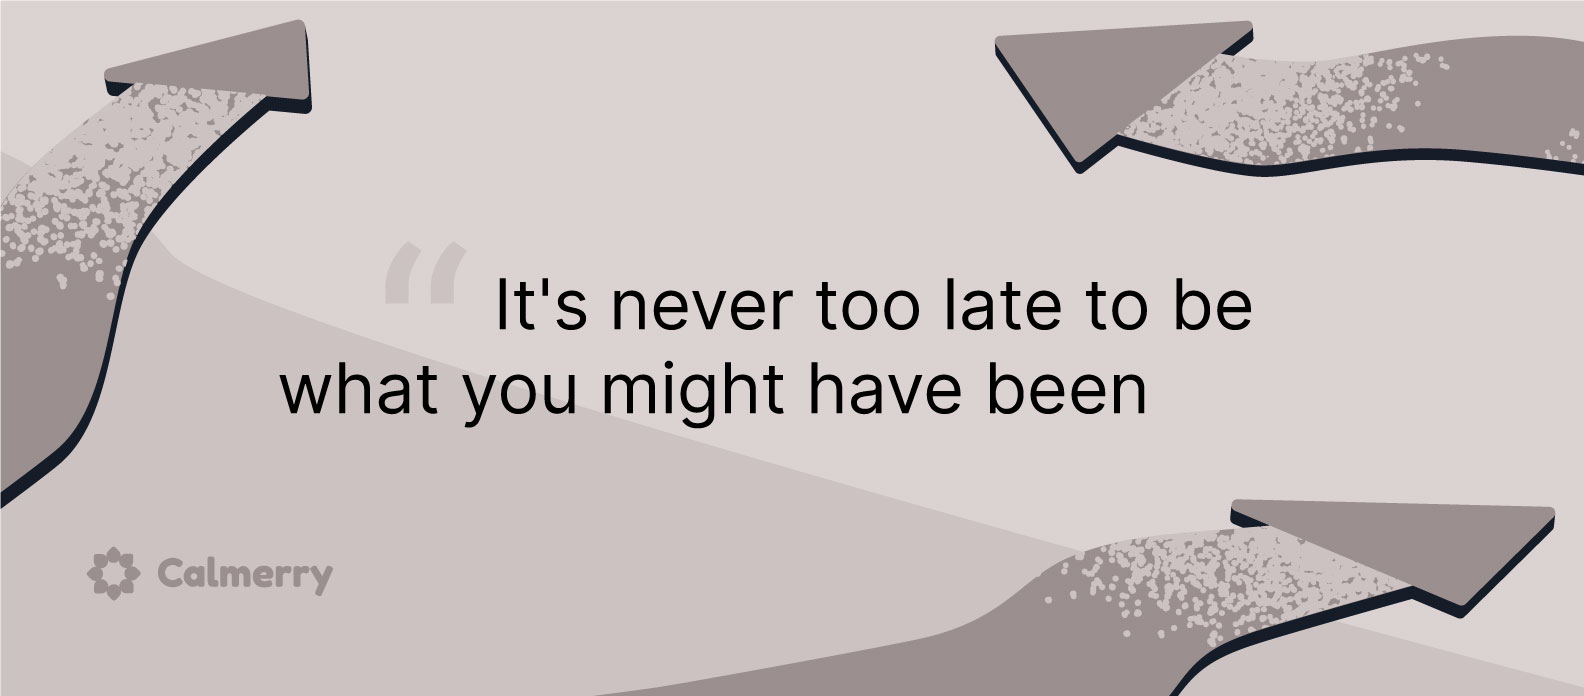 It's never too late to be what you might have been